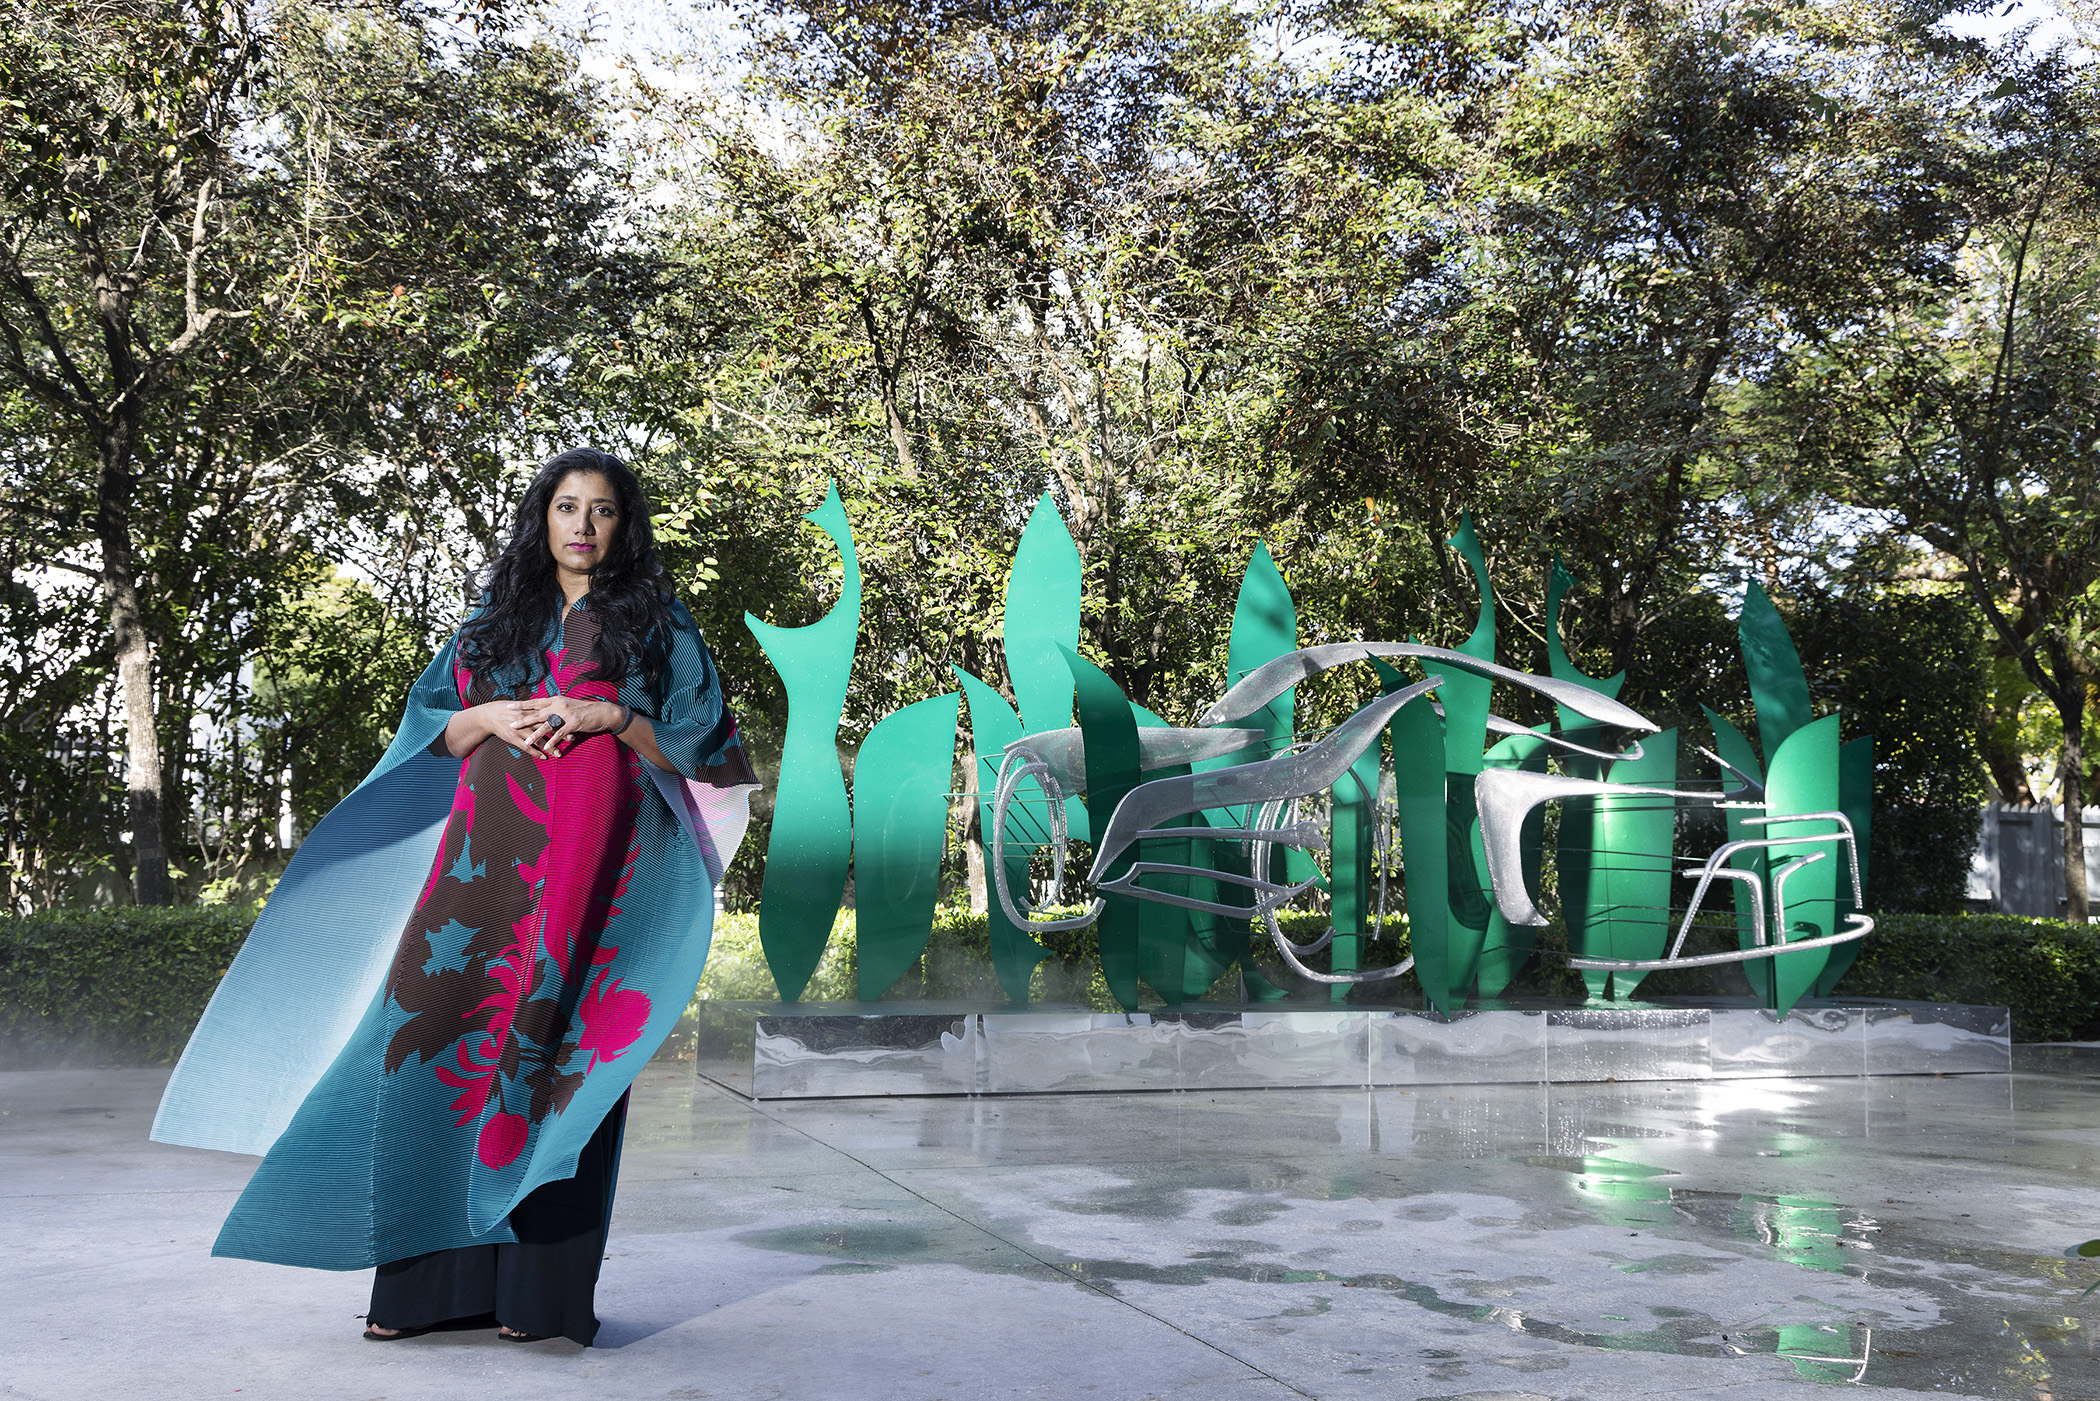 Suchi Reddy standing in front of her sculpture at the institute of contemporary art miami